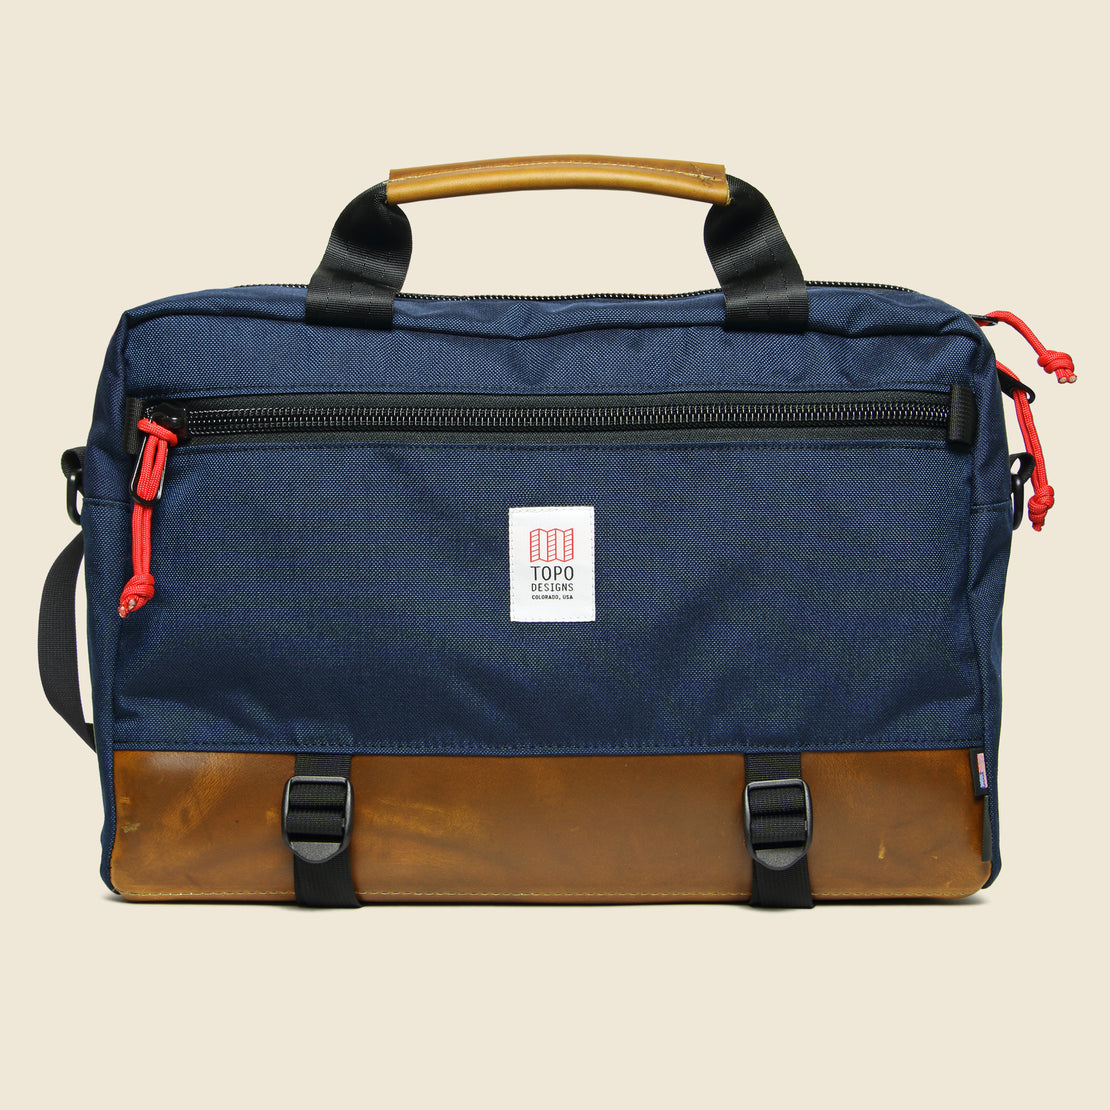 Topo Designs Commuter Briefcase - Navy/Brown Leather